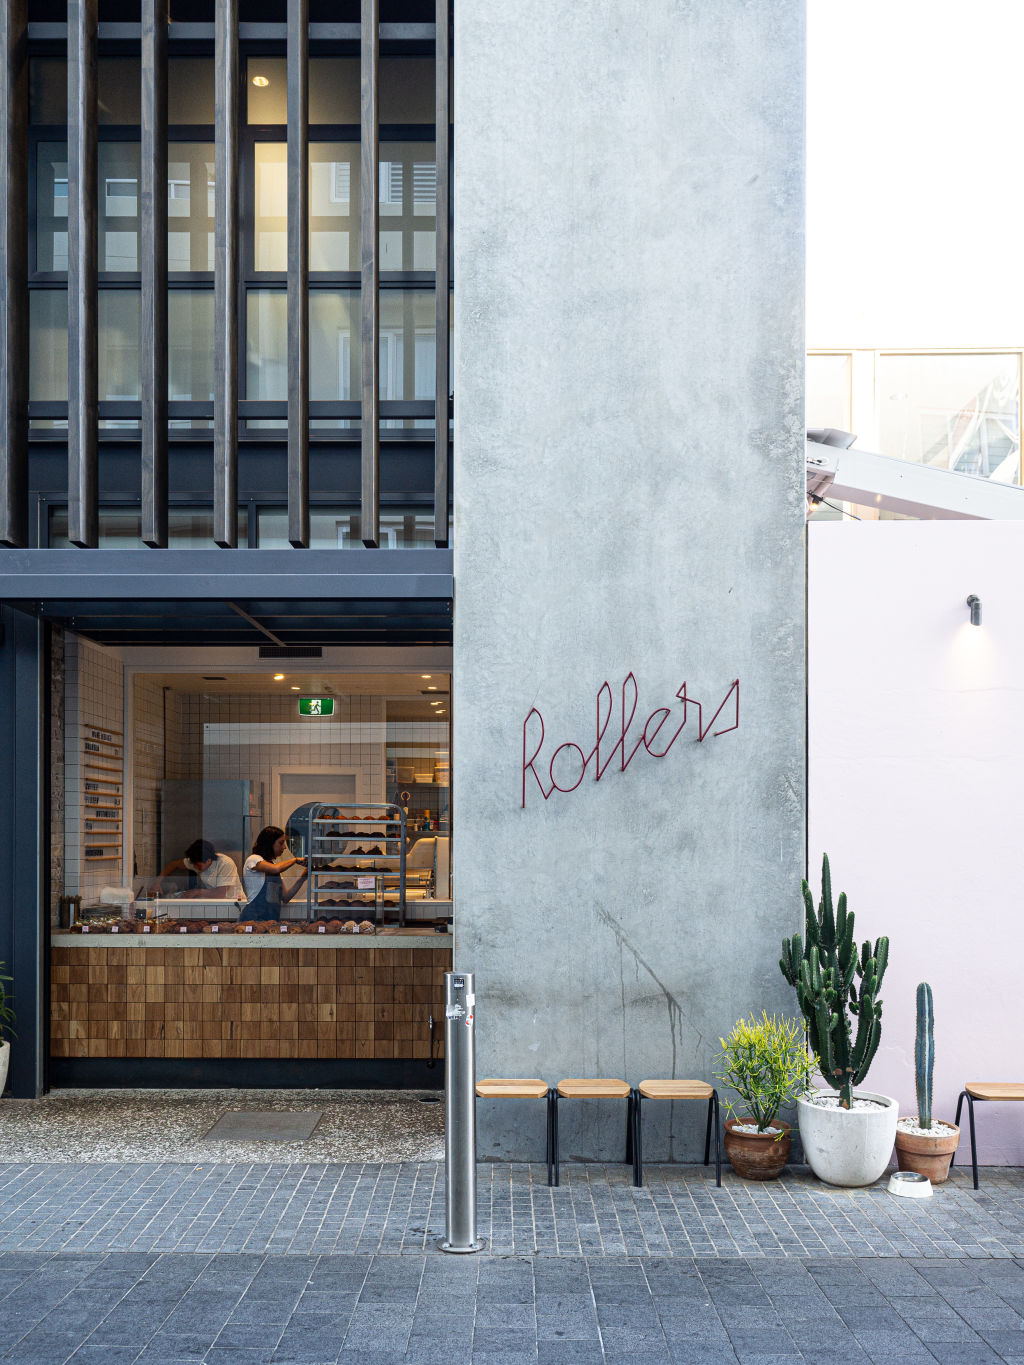 Head on over to Rollers bakery. Photo: Pauline Morrissey